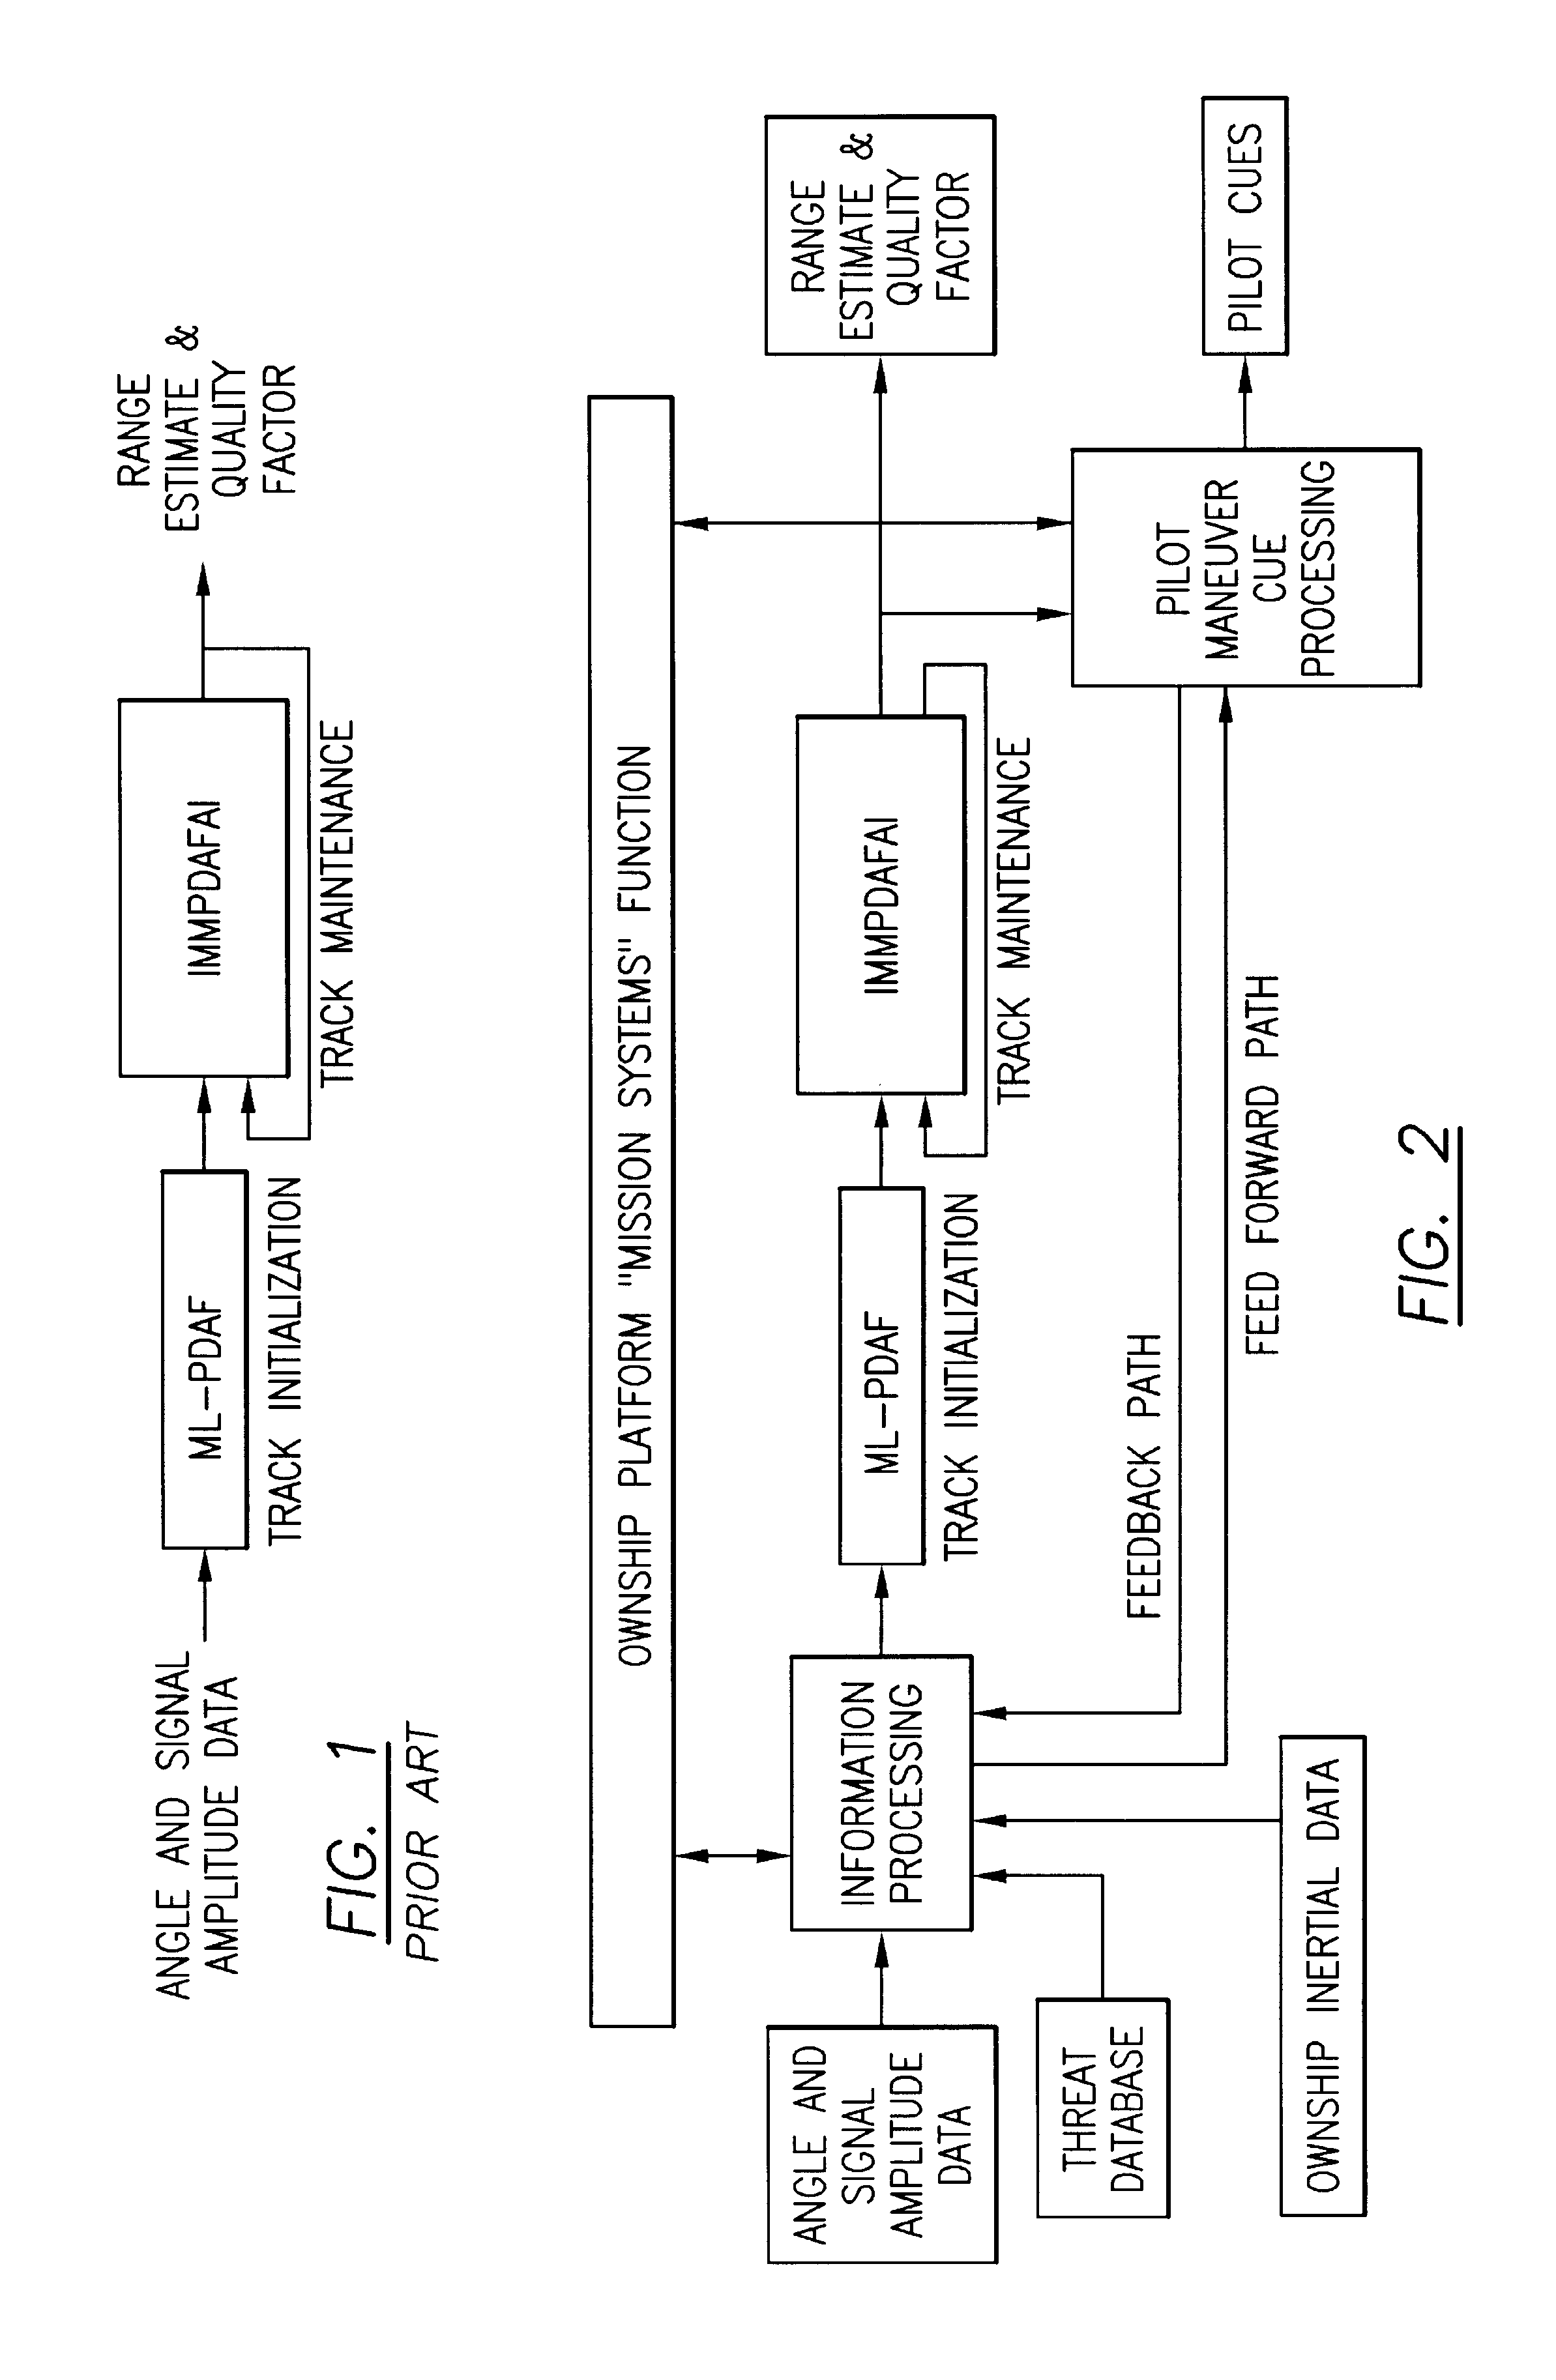 Method for passive "360-degree coverage" tactical fighter target tracking incorporating adaptive pilot maneuver cue processing